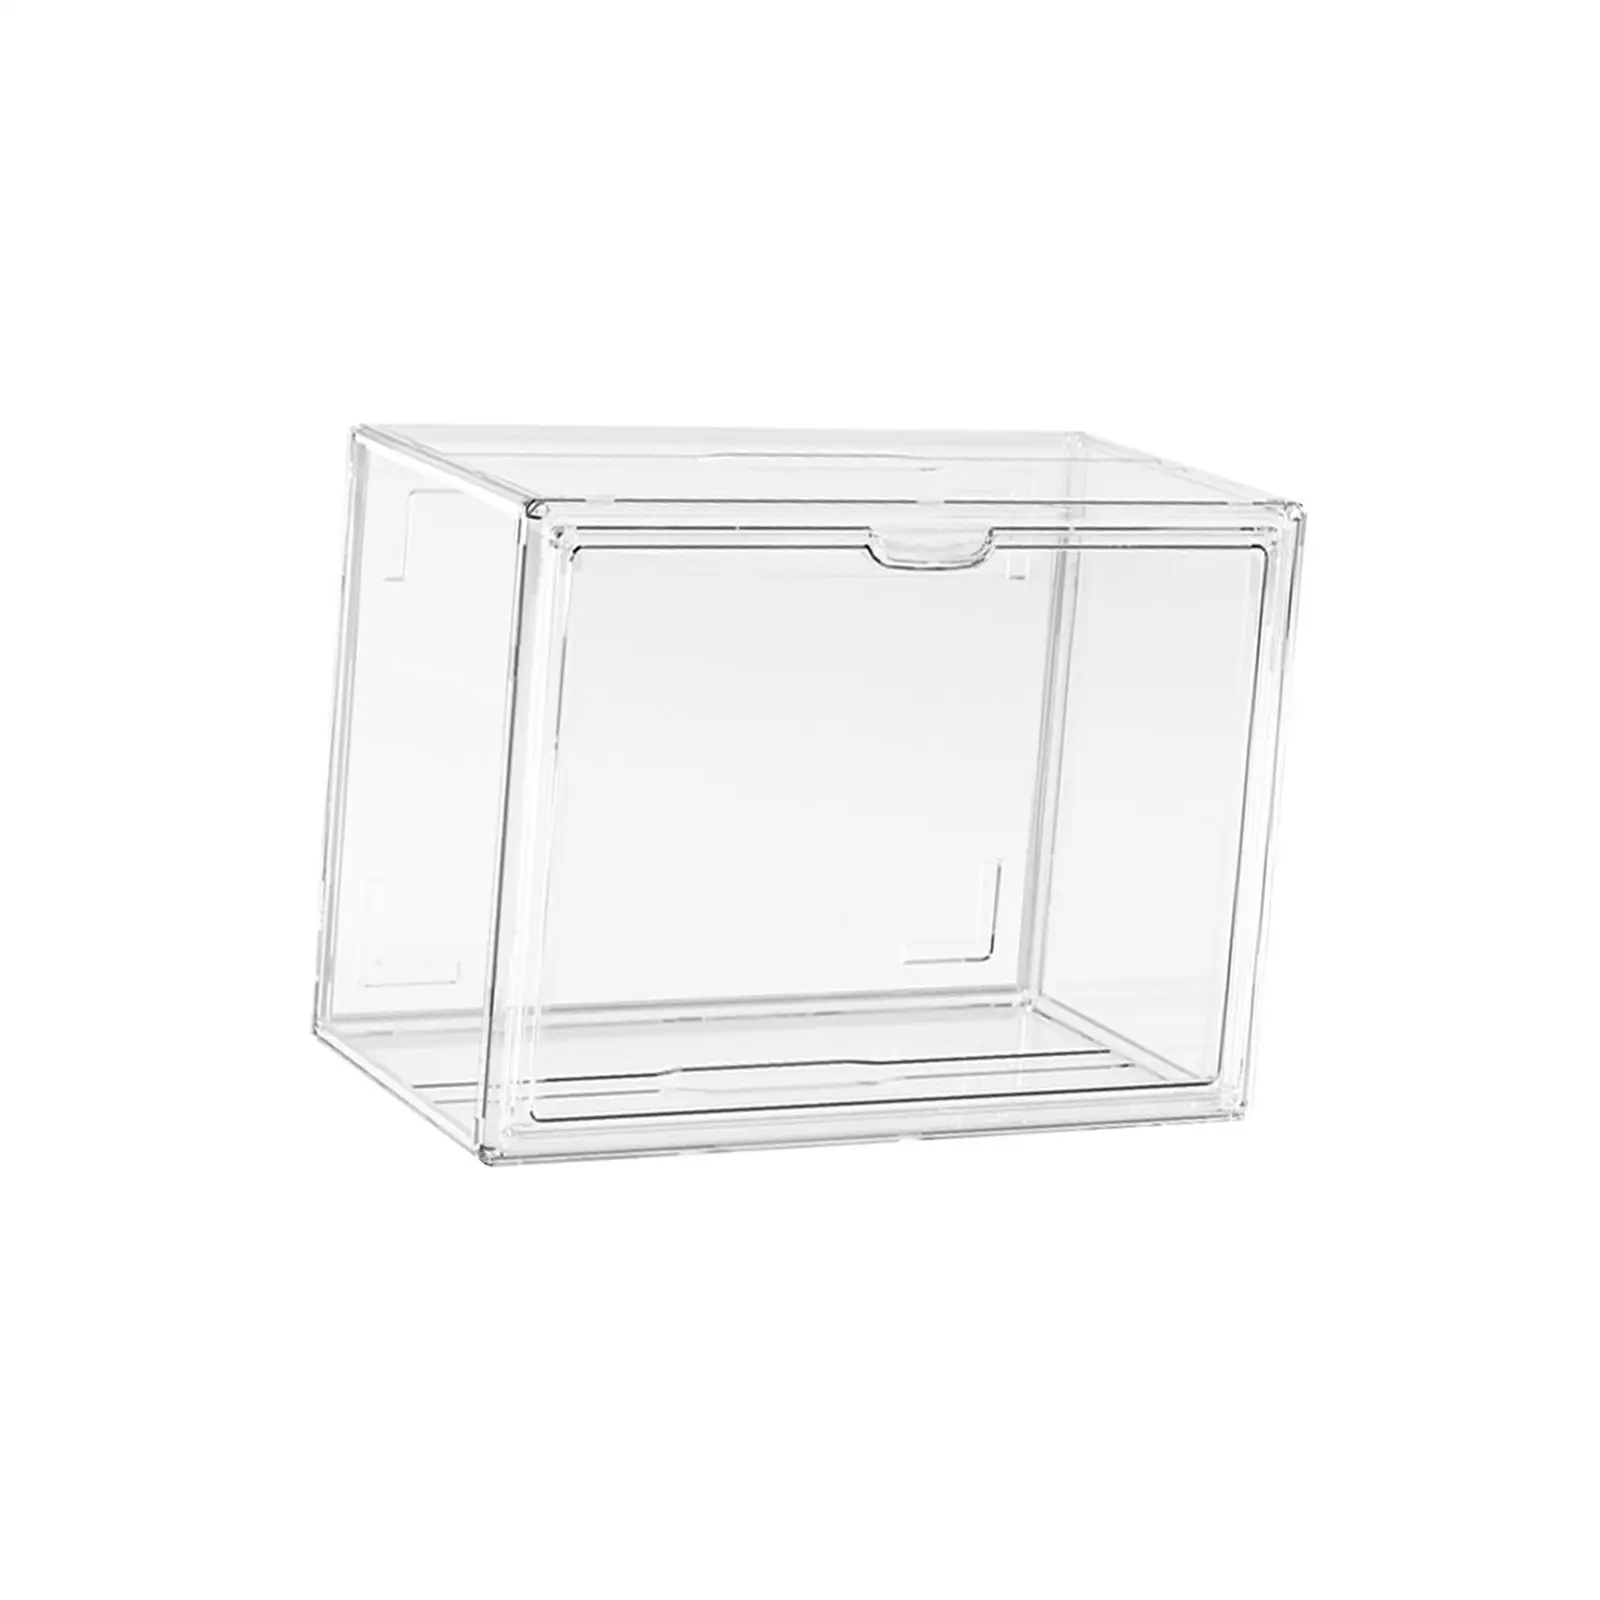 Clear Display Case Dustproof Countertop Display Rack Cube Organizer Protection Shelf Stand Display Box for Miniature Figurines